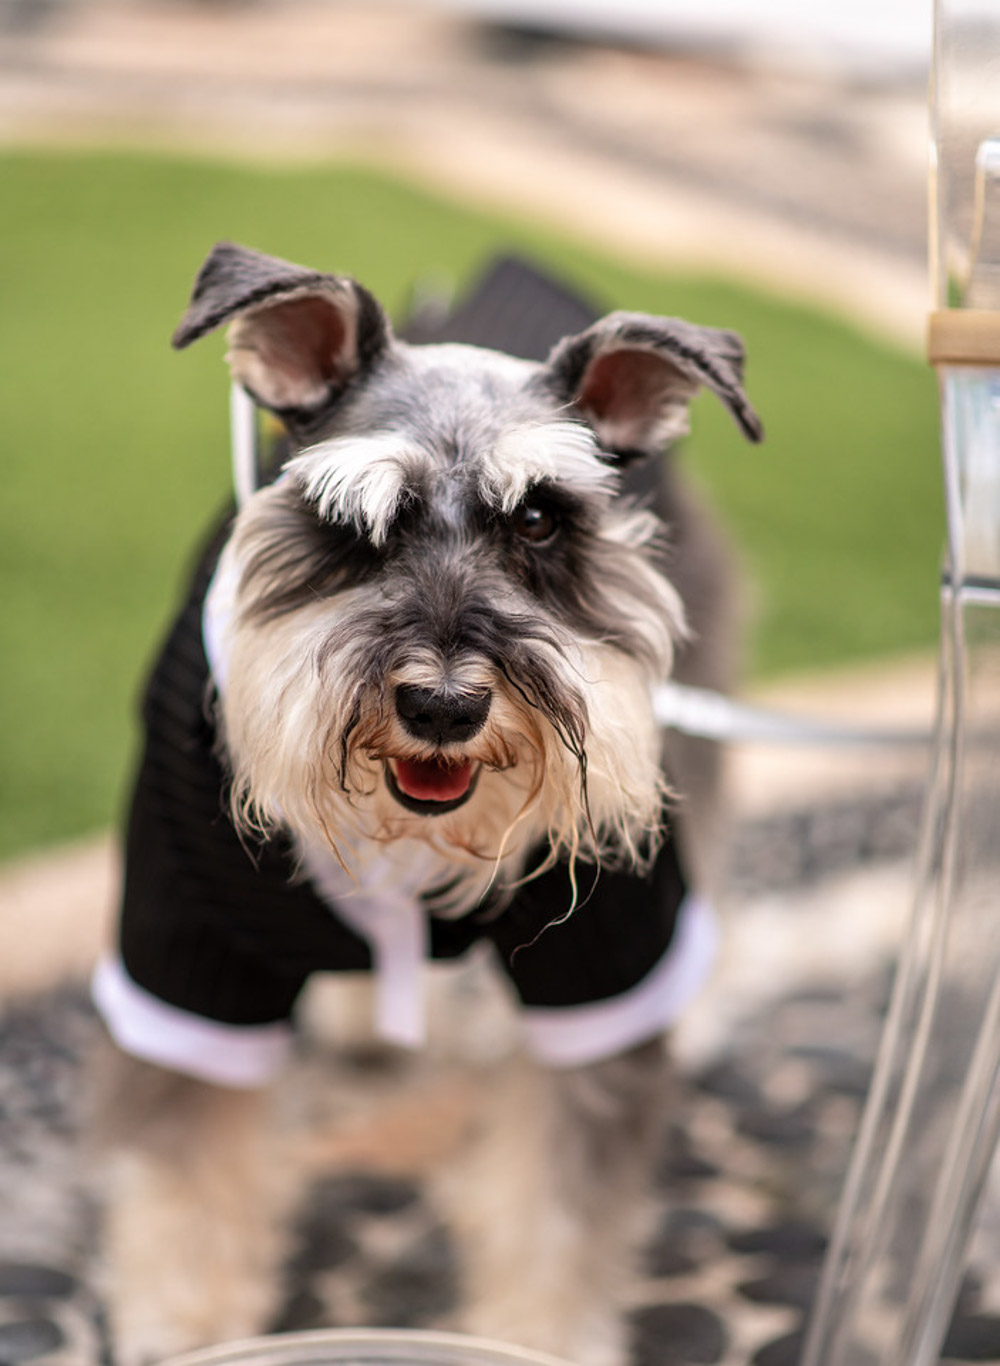 Angelina + Krista: Upscale glamorous lesbian wedding at the renowned Versace mansion in Miami Beach, Florida Suzanne Delawar Studios dog in tuxedo